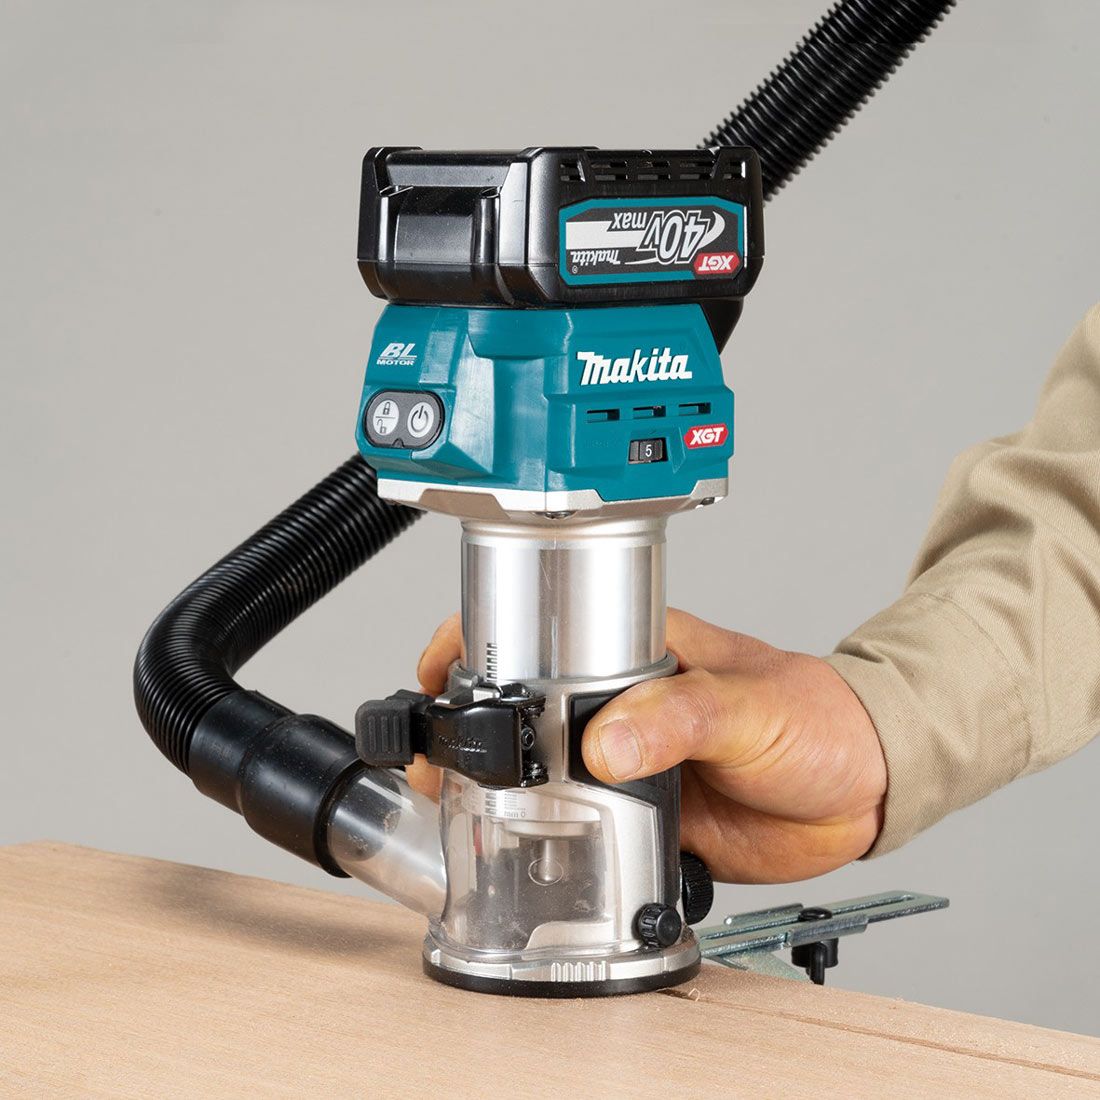 Makita 40V MAX XGT 1/4" & 3/8" Brushless Router with Trimmer RT001GZ